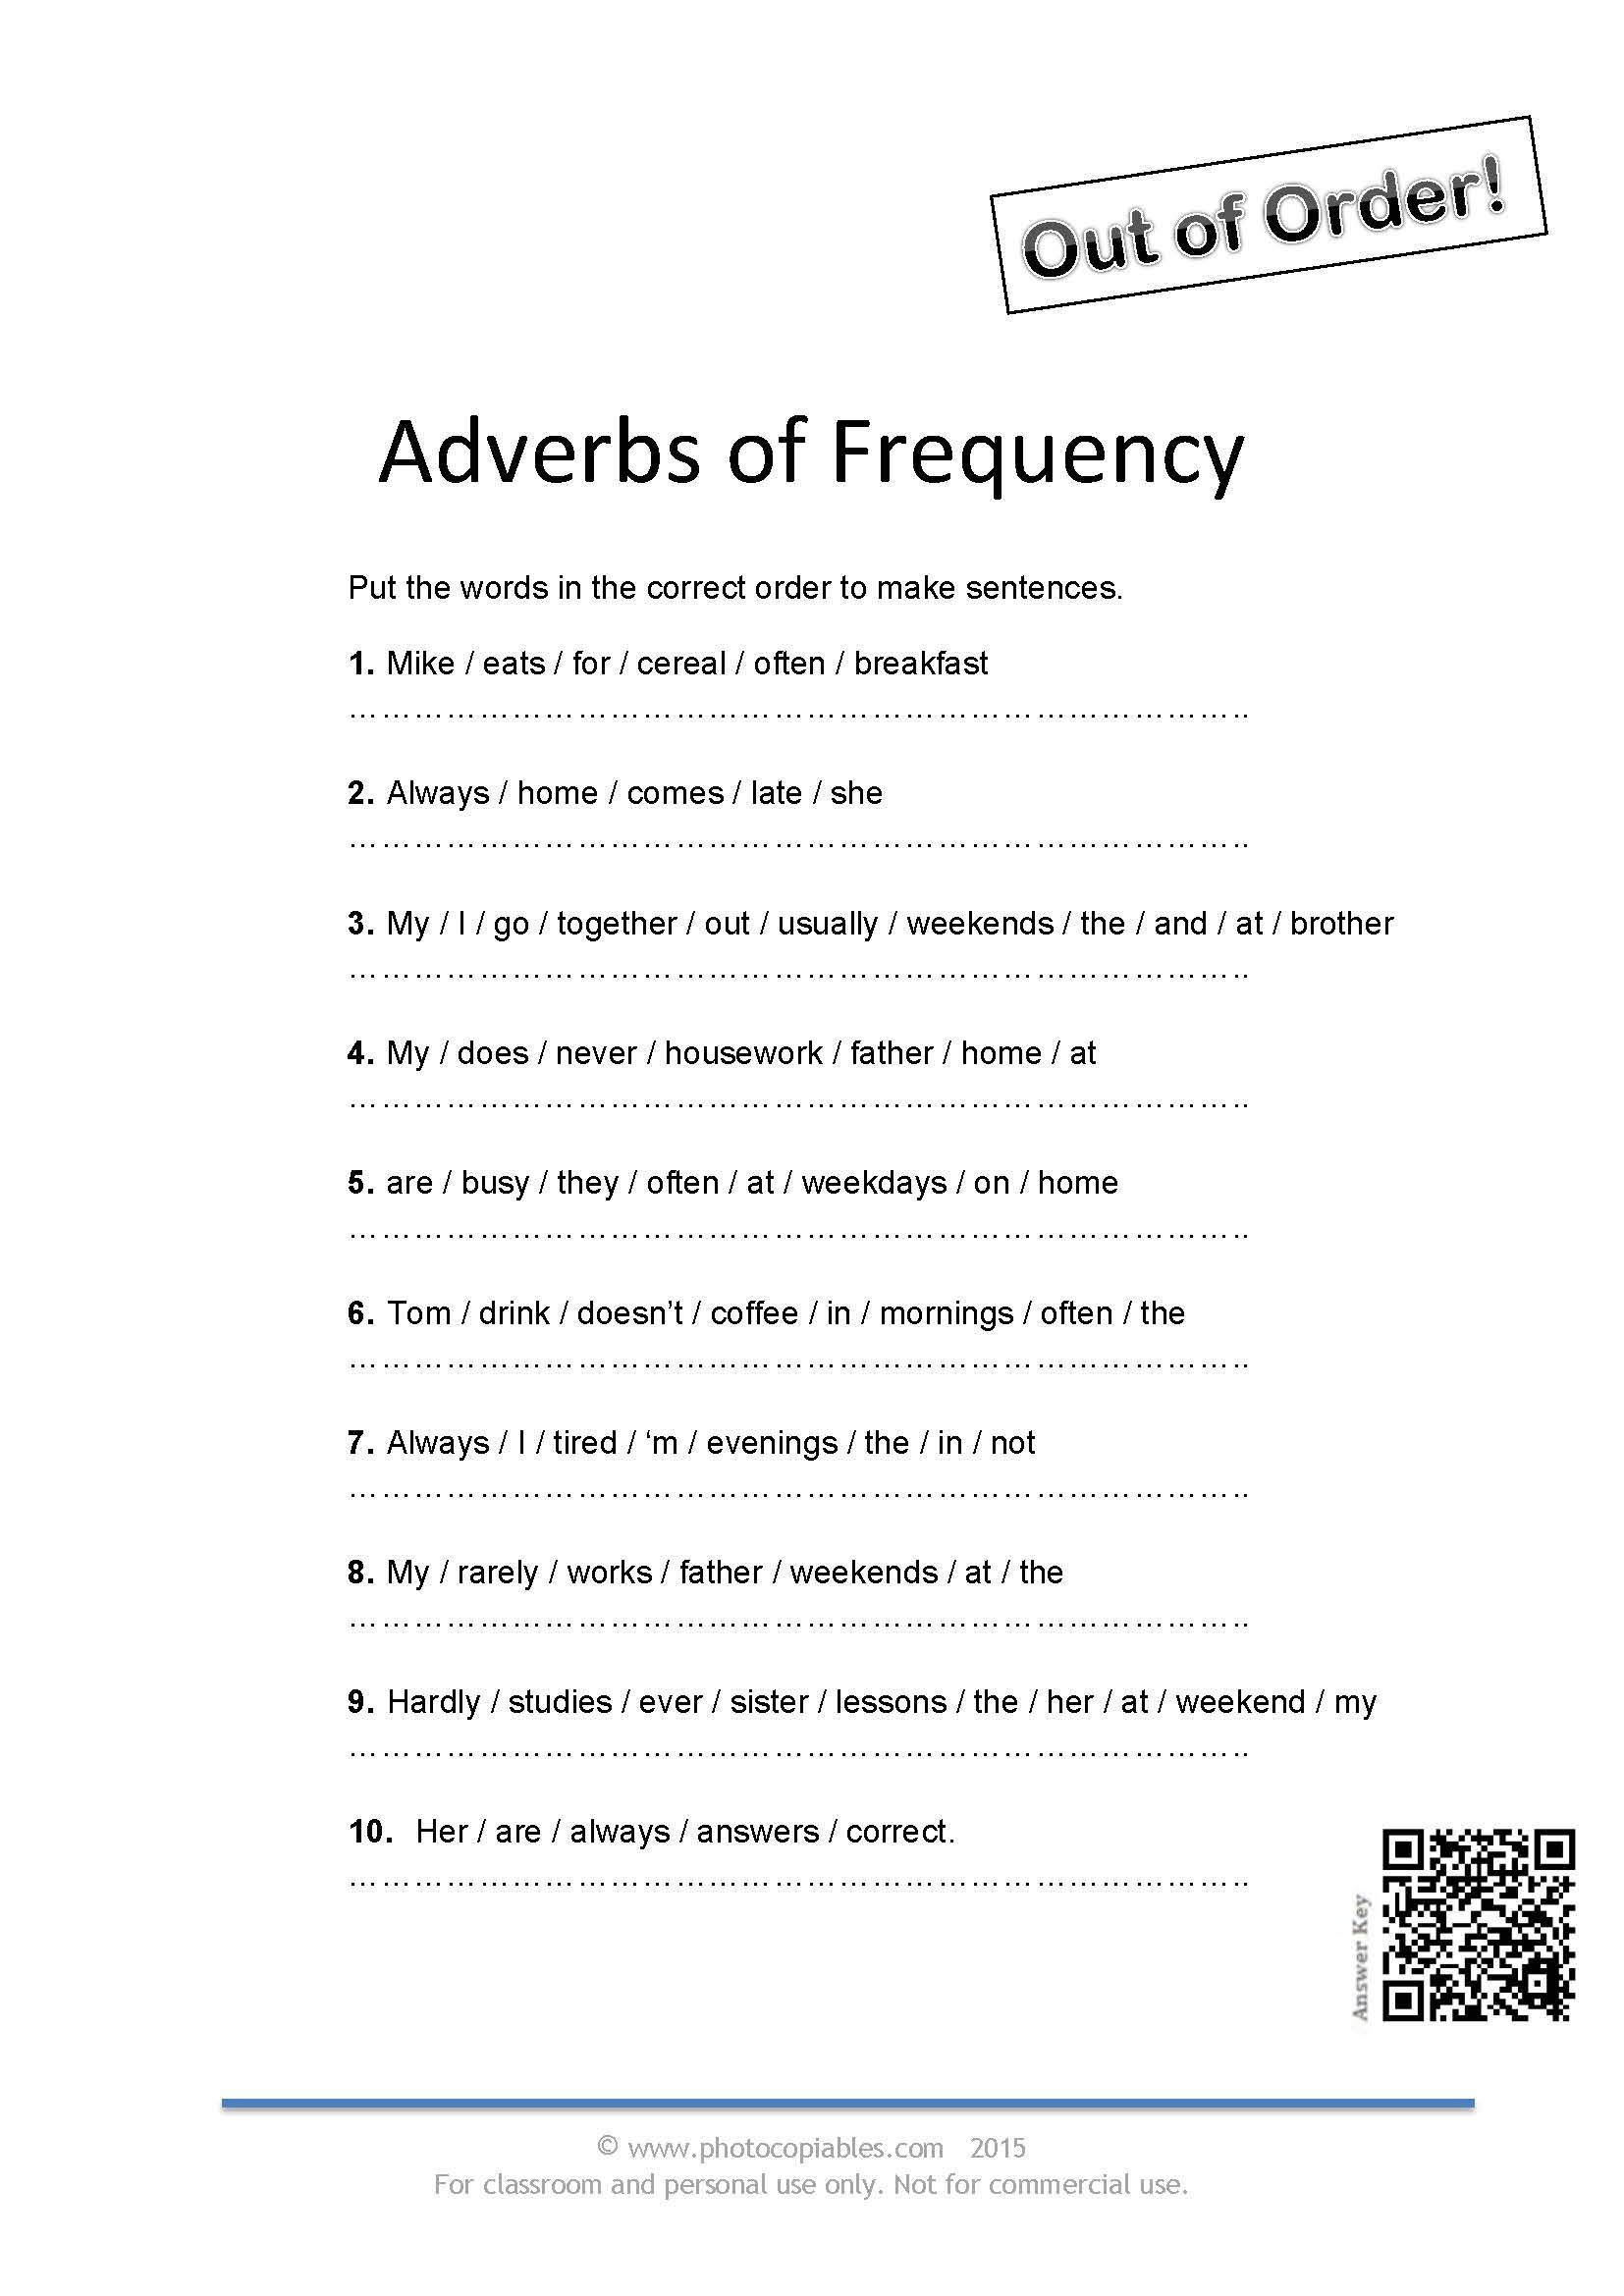 adverbs-of-frequency-worksheet-photocopiables